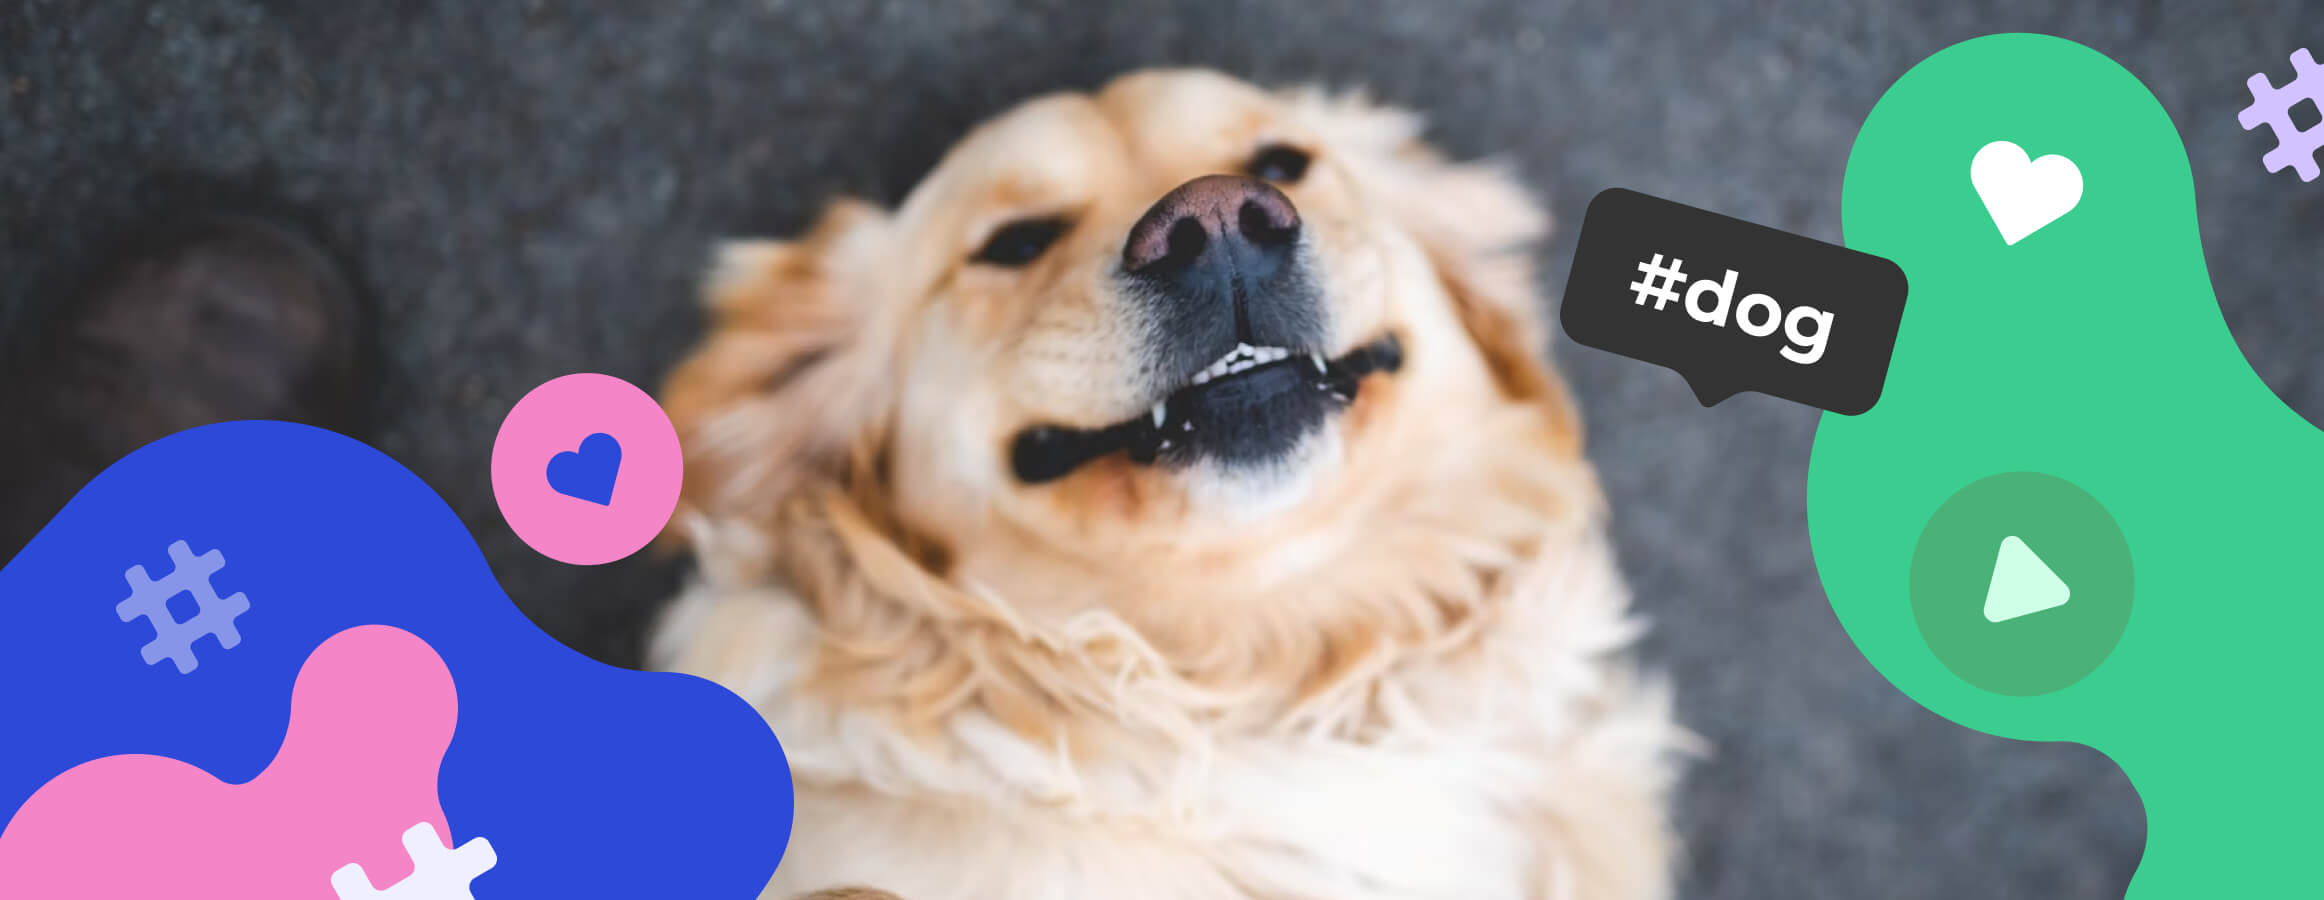 Dog hashtags for Instagram | Inflact